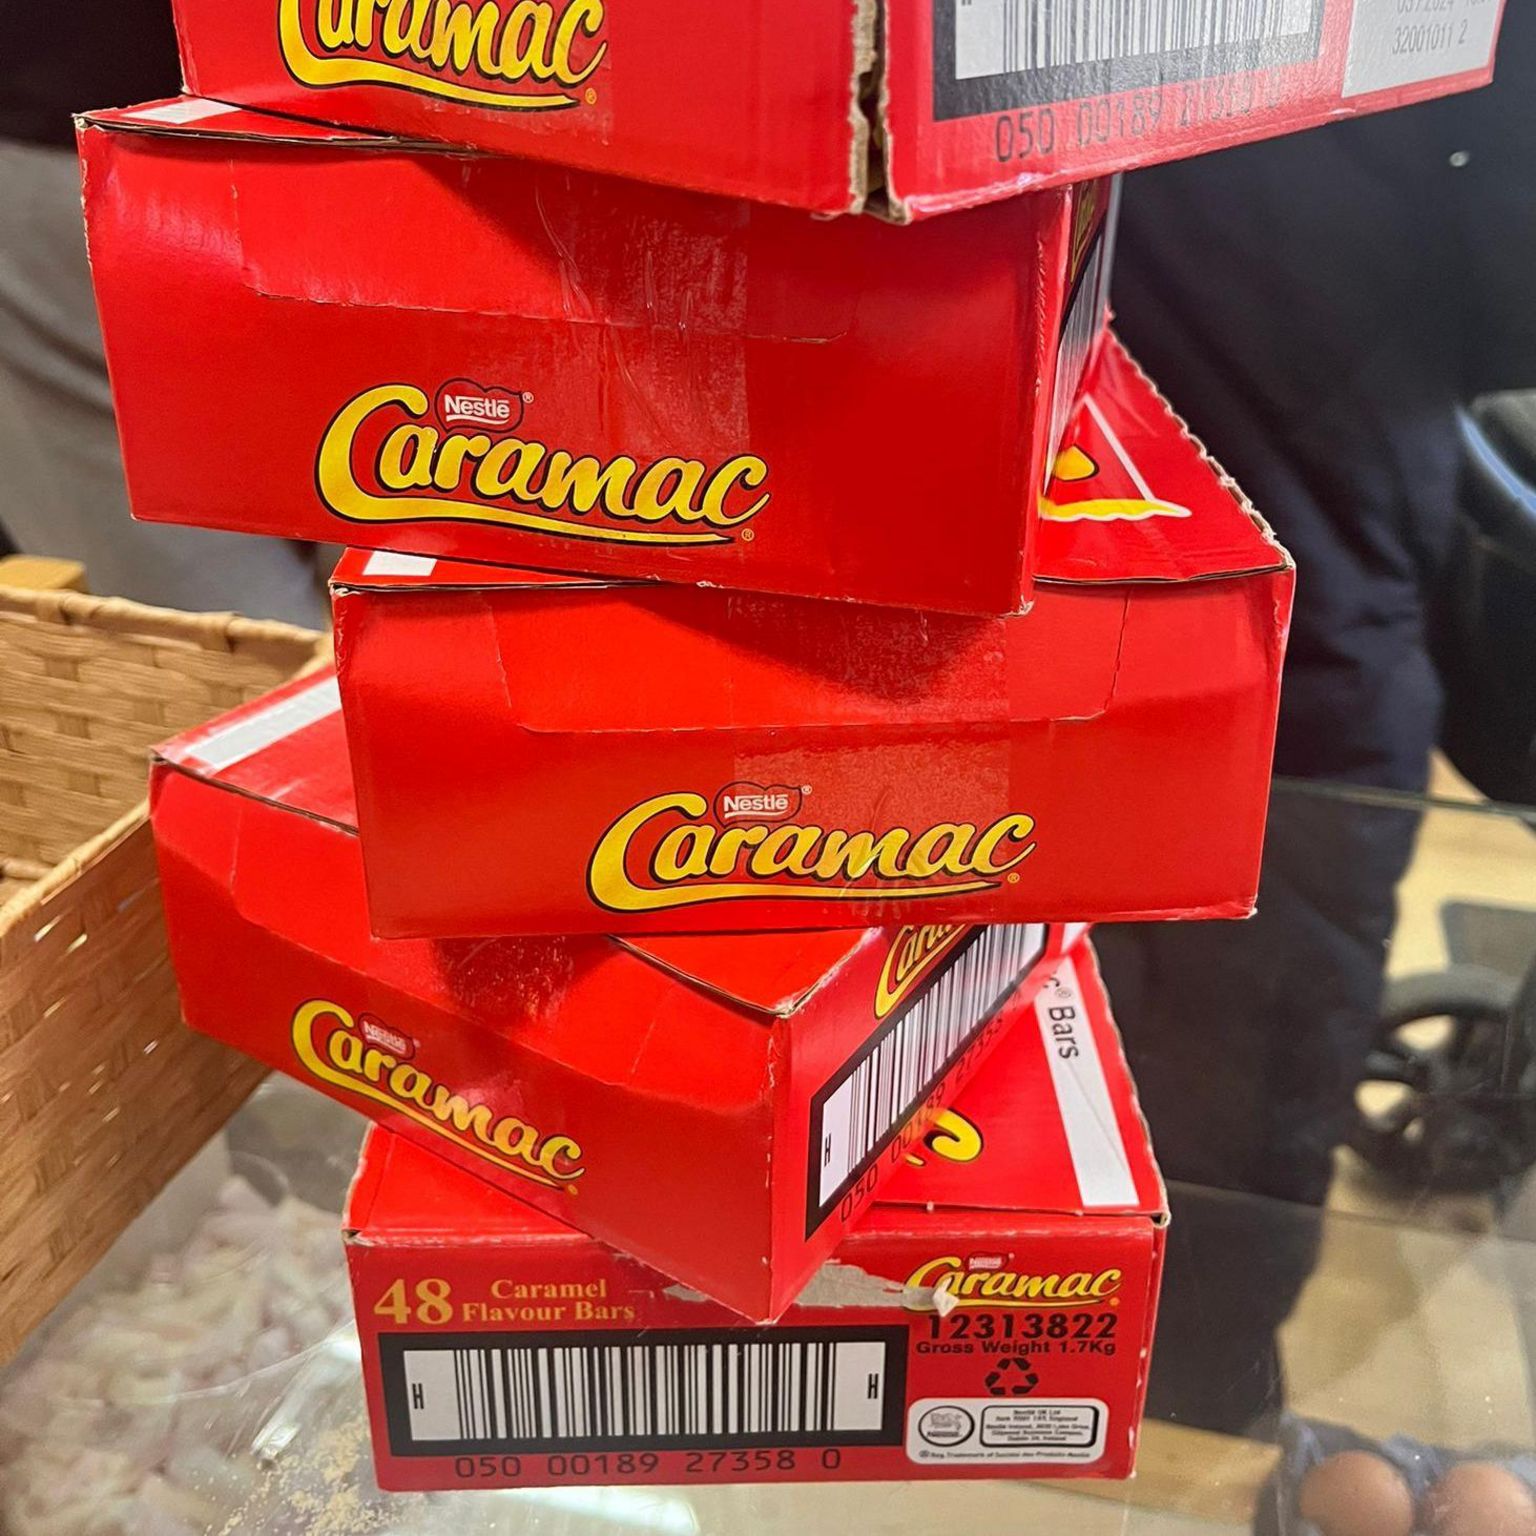 Five stacked red boxes of Caramac bars.